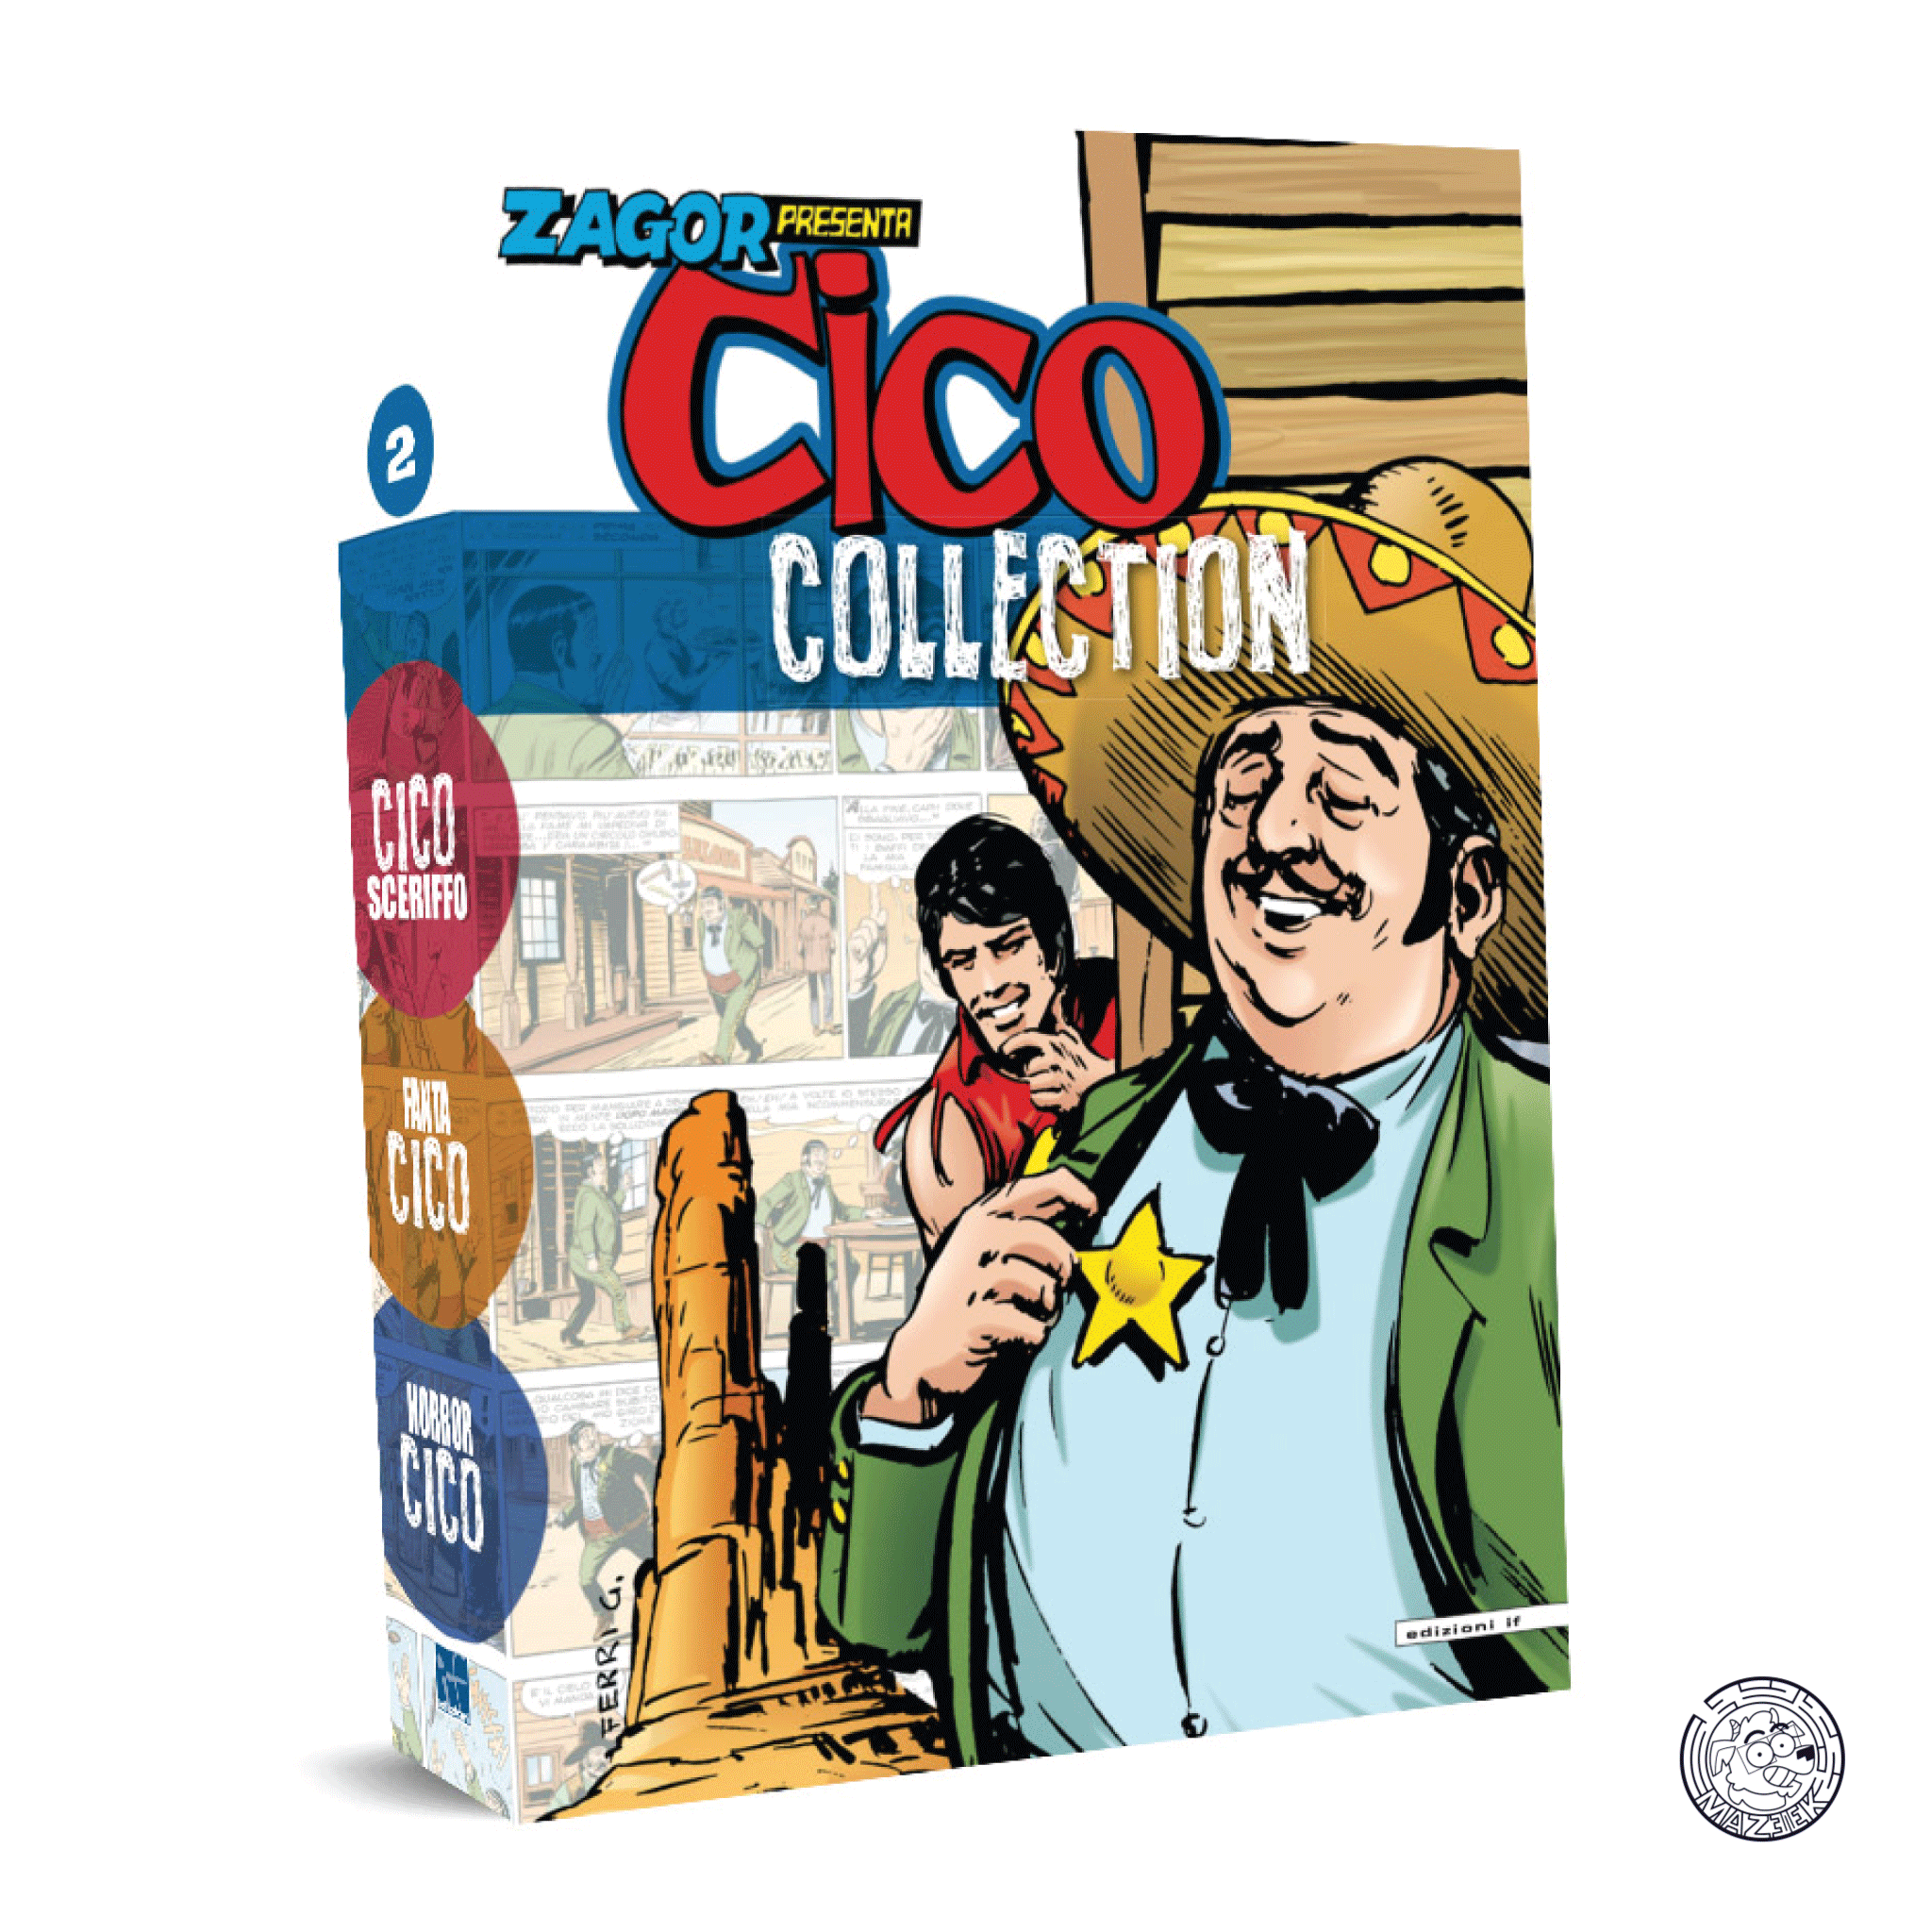 Cico Collection